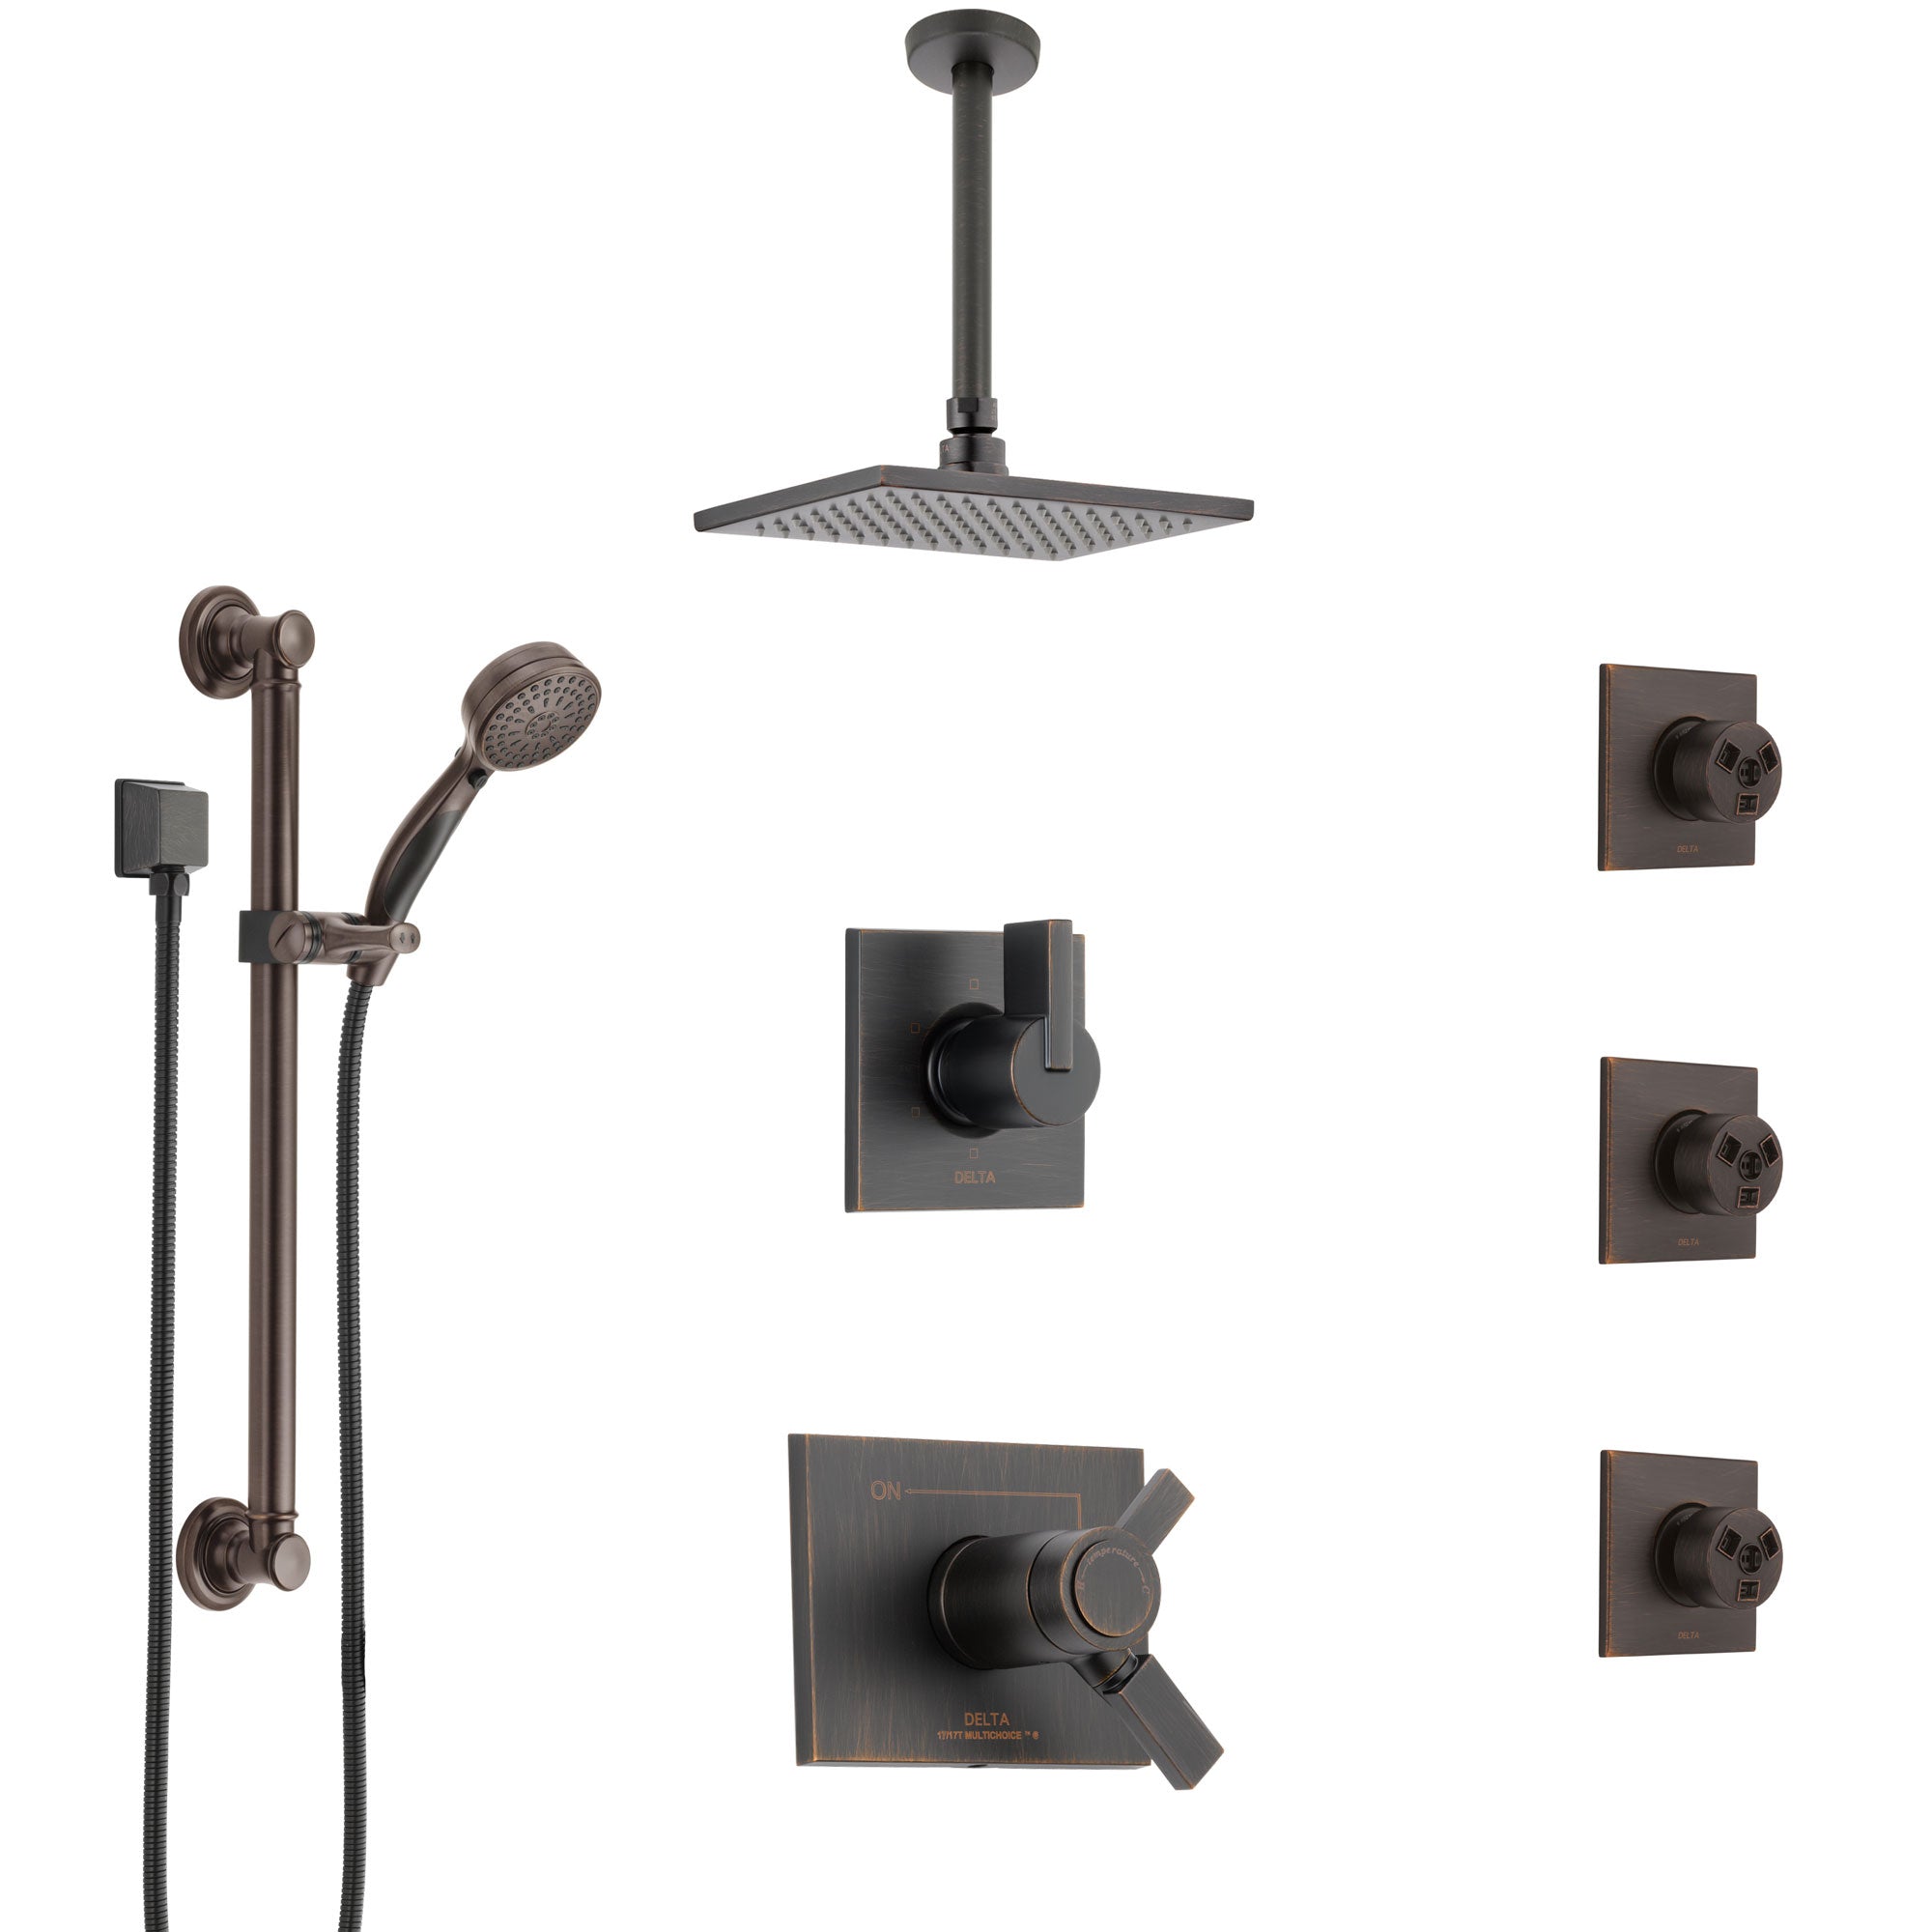 Delta Vero Venetian Bronze Dual Thermostatic Control Shower System, Diverter, Ceiling Showerhead, 3 Body Sprays, and Grab Bar Hand Spray SS17T532RB2